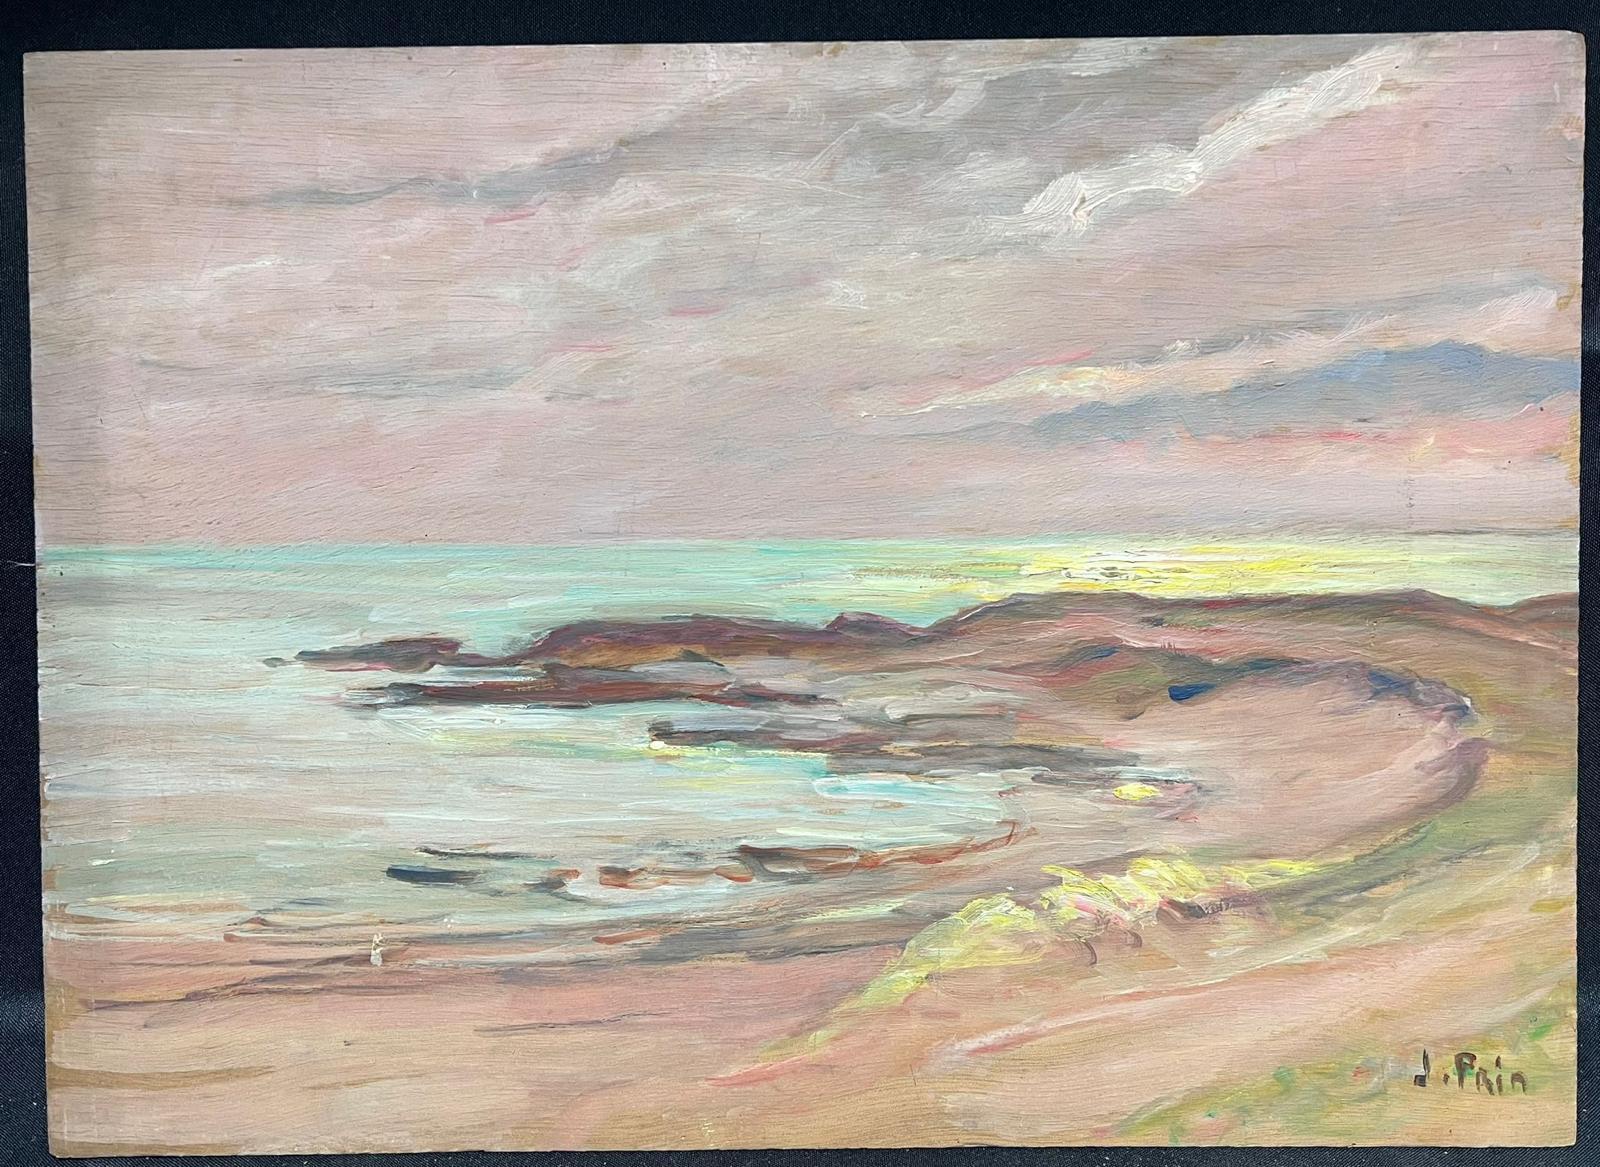 The Turquoise Coastline
French Impressionist artist, 20th century
signed oil on board, unframed
board: 13 x 18 inches
provenance: private collection
condition: very good and sound condition